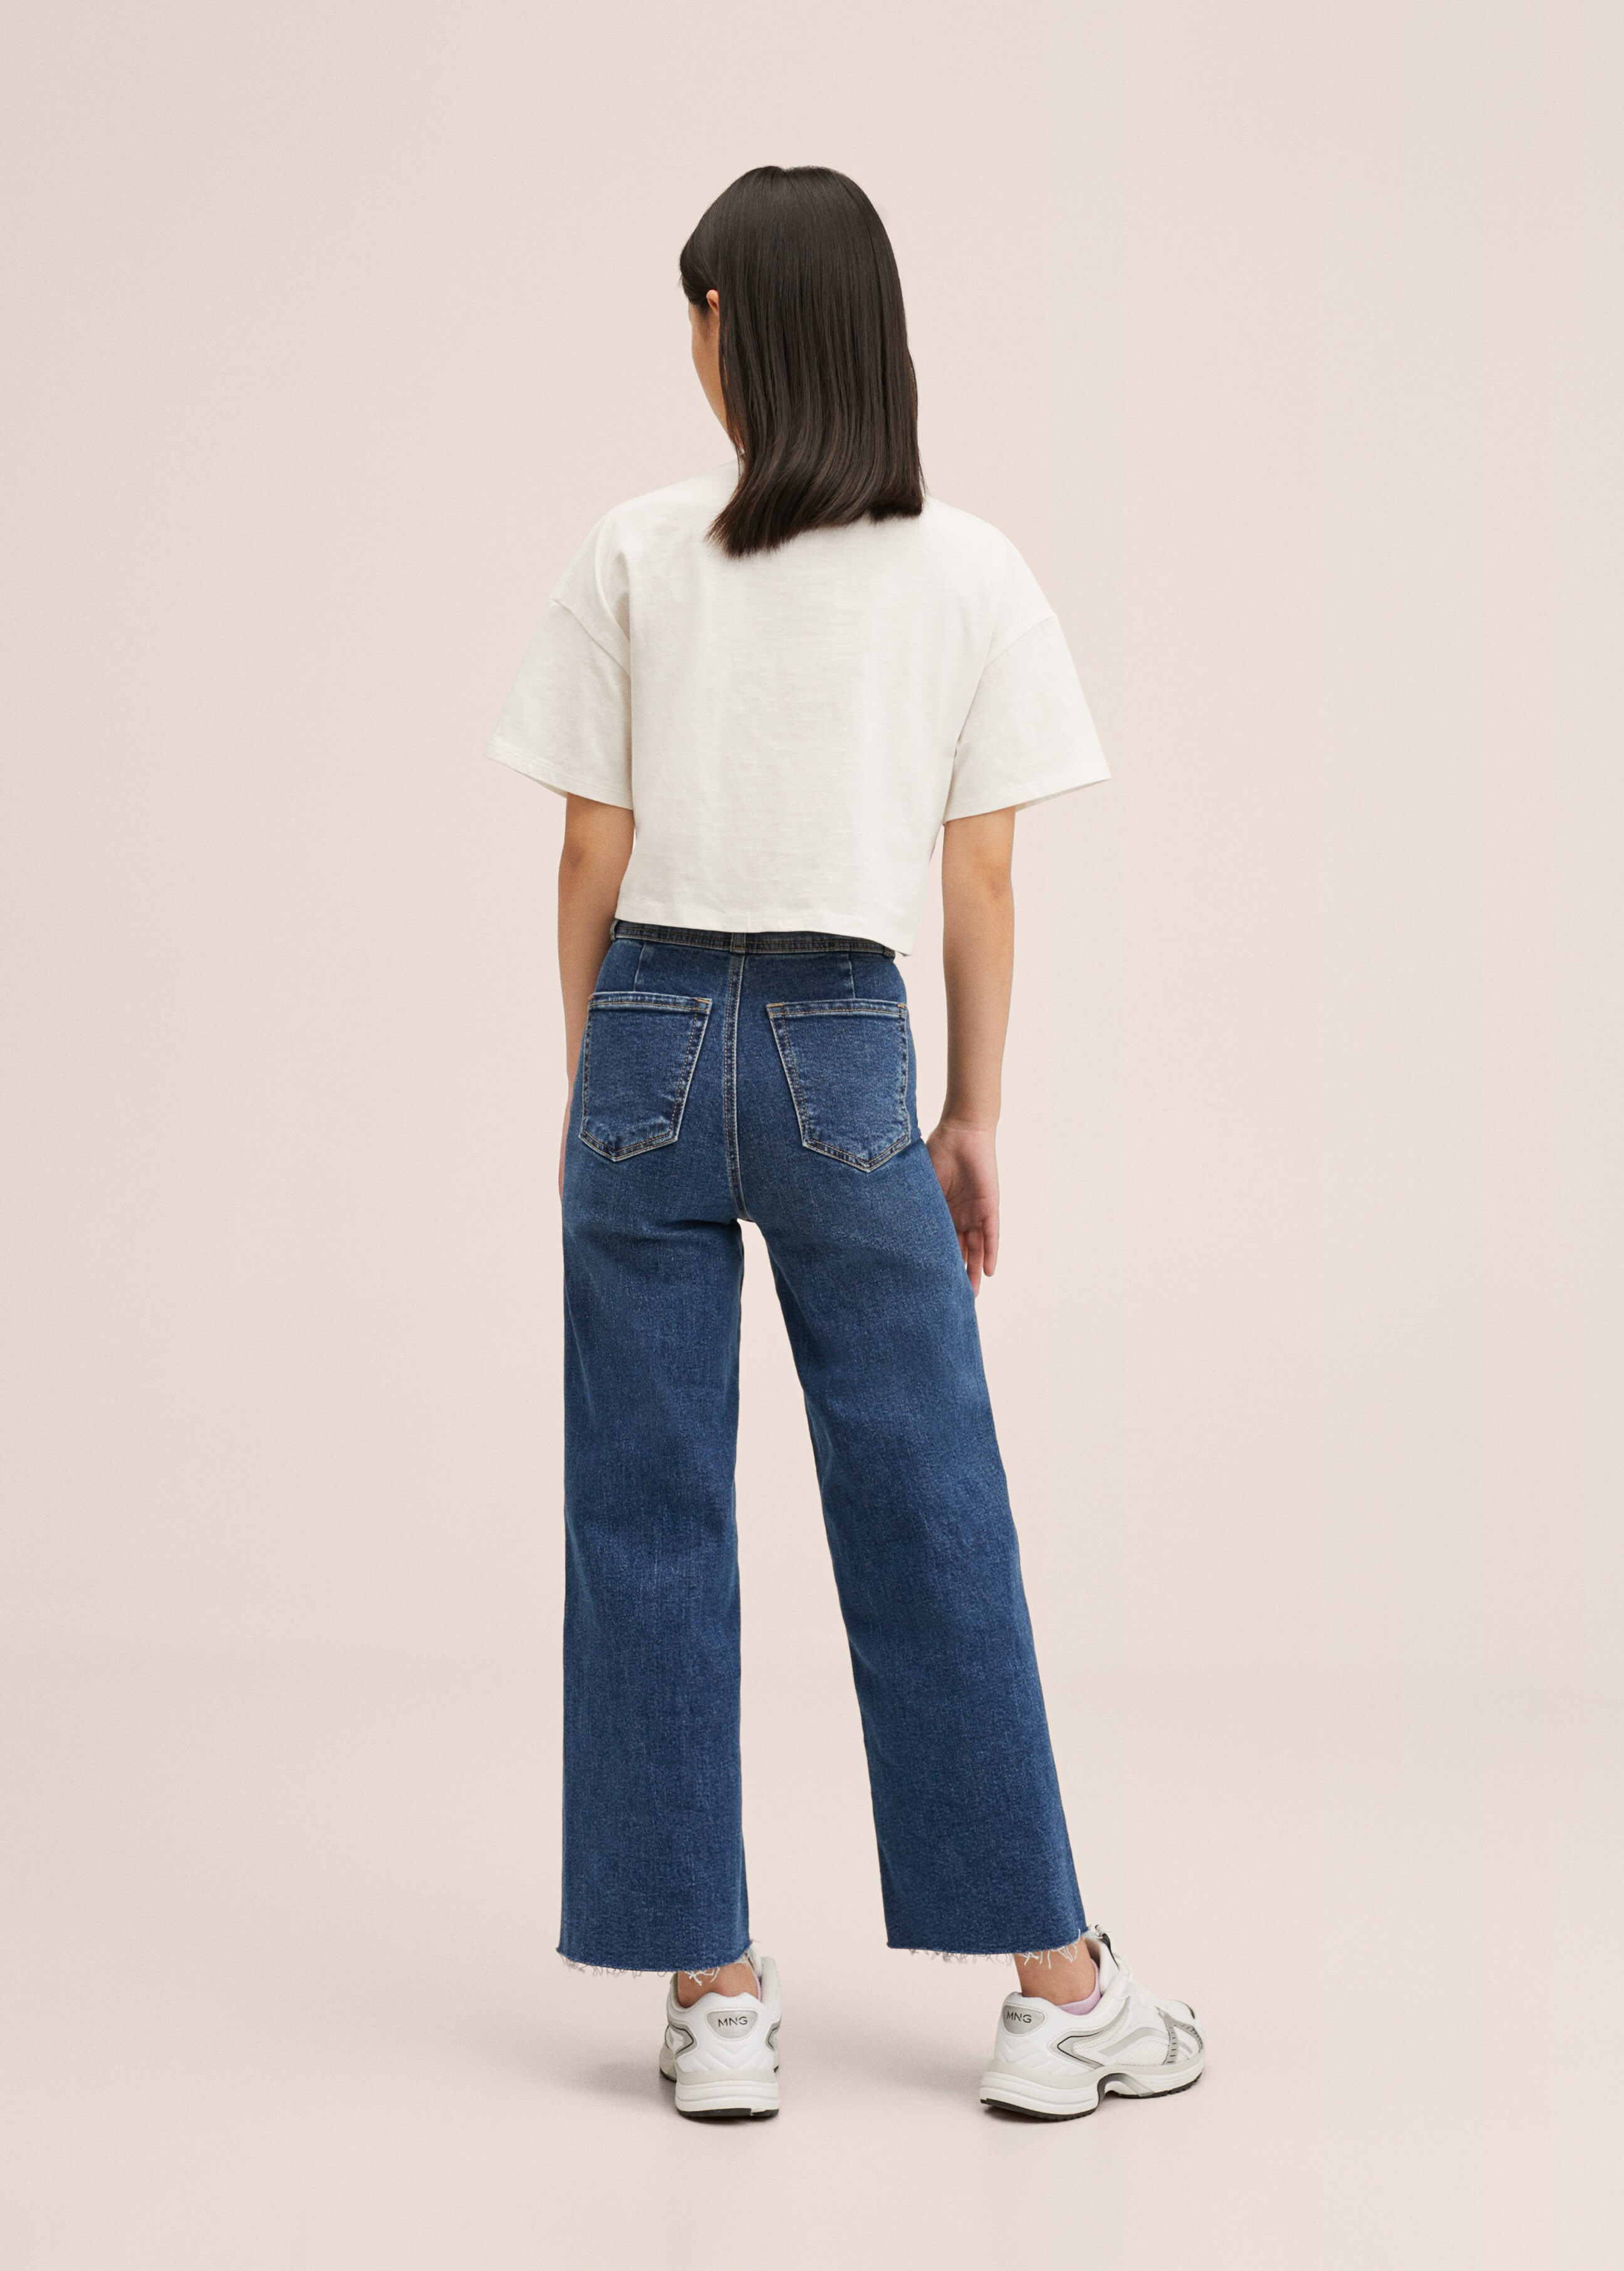 Culotte frayed jeans - Reverse of the article